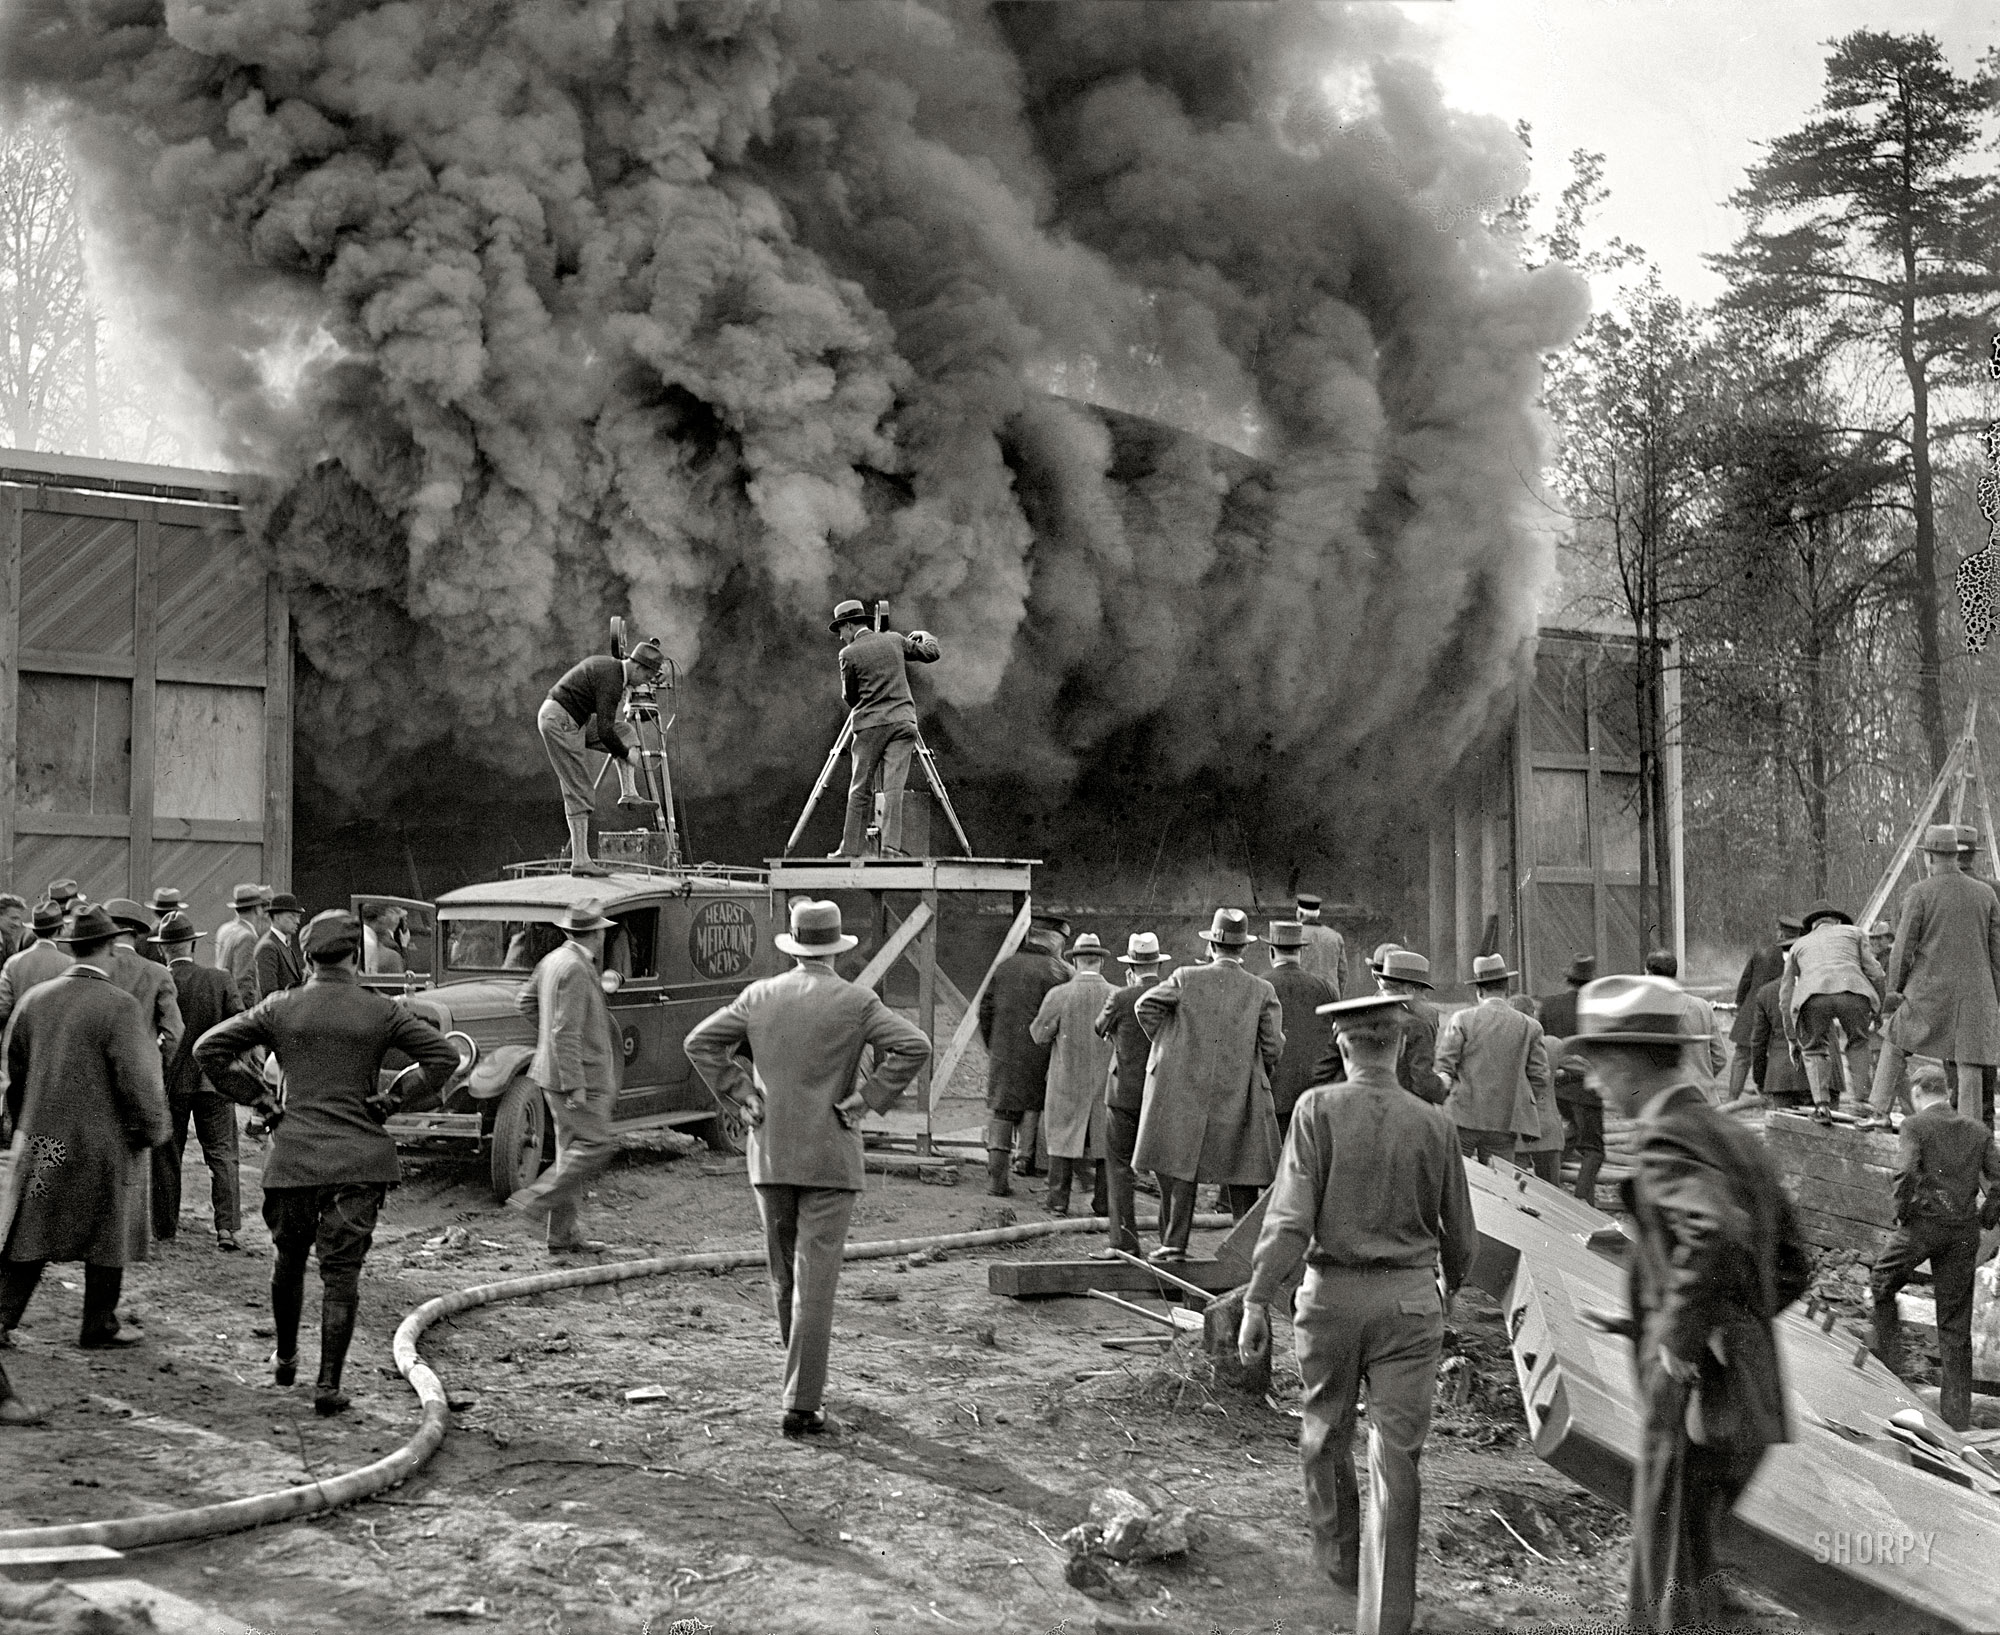 Washington, D.C., or vicinity circa 1928. "Photographing fire for newsreels." National Photo Company Collection glass negative. View full size.